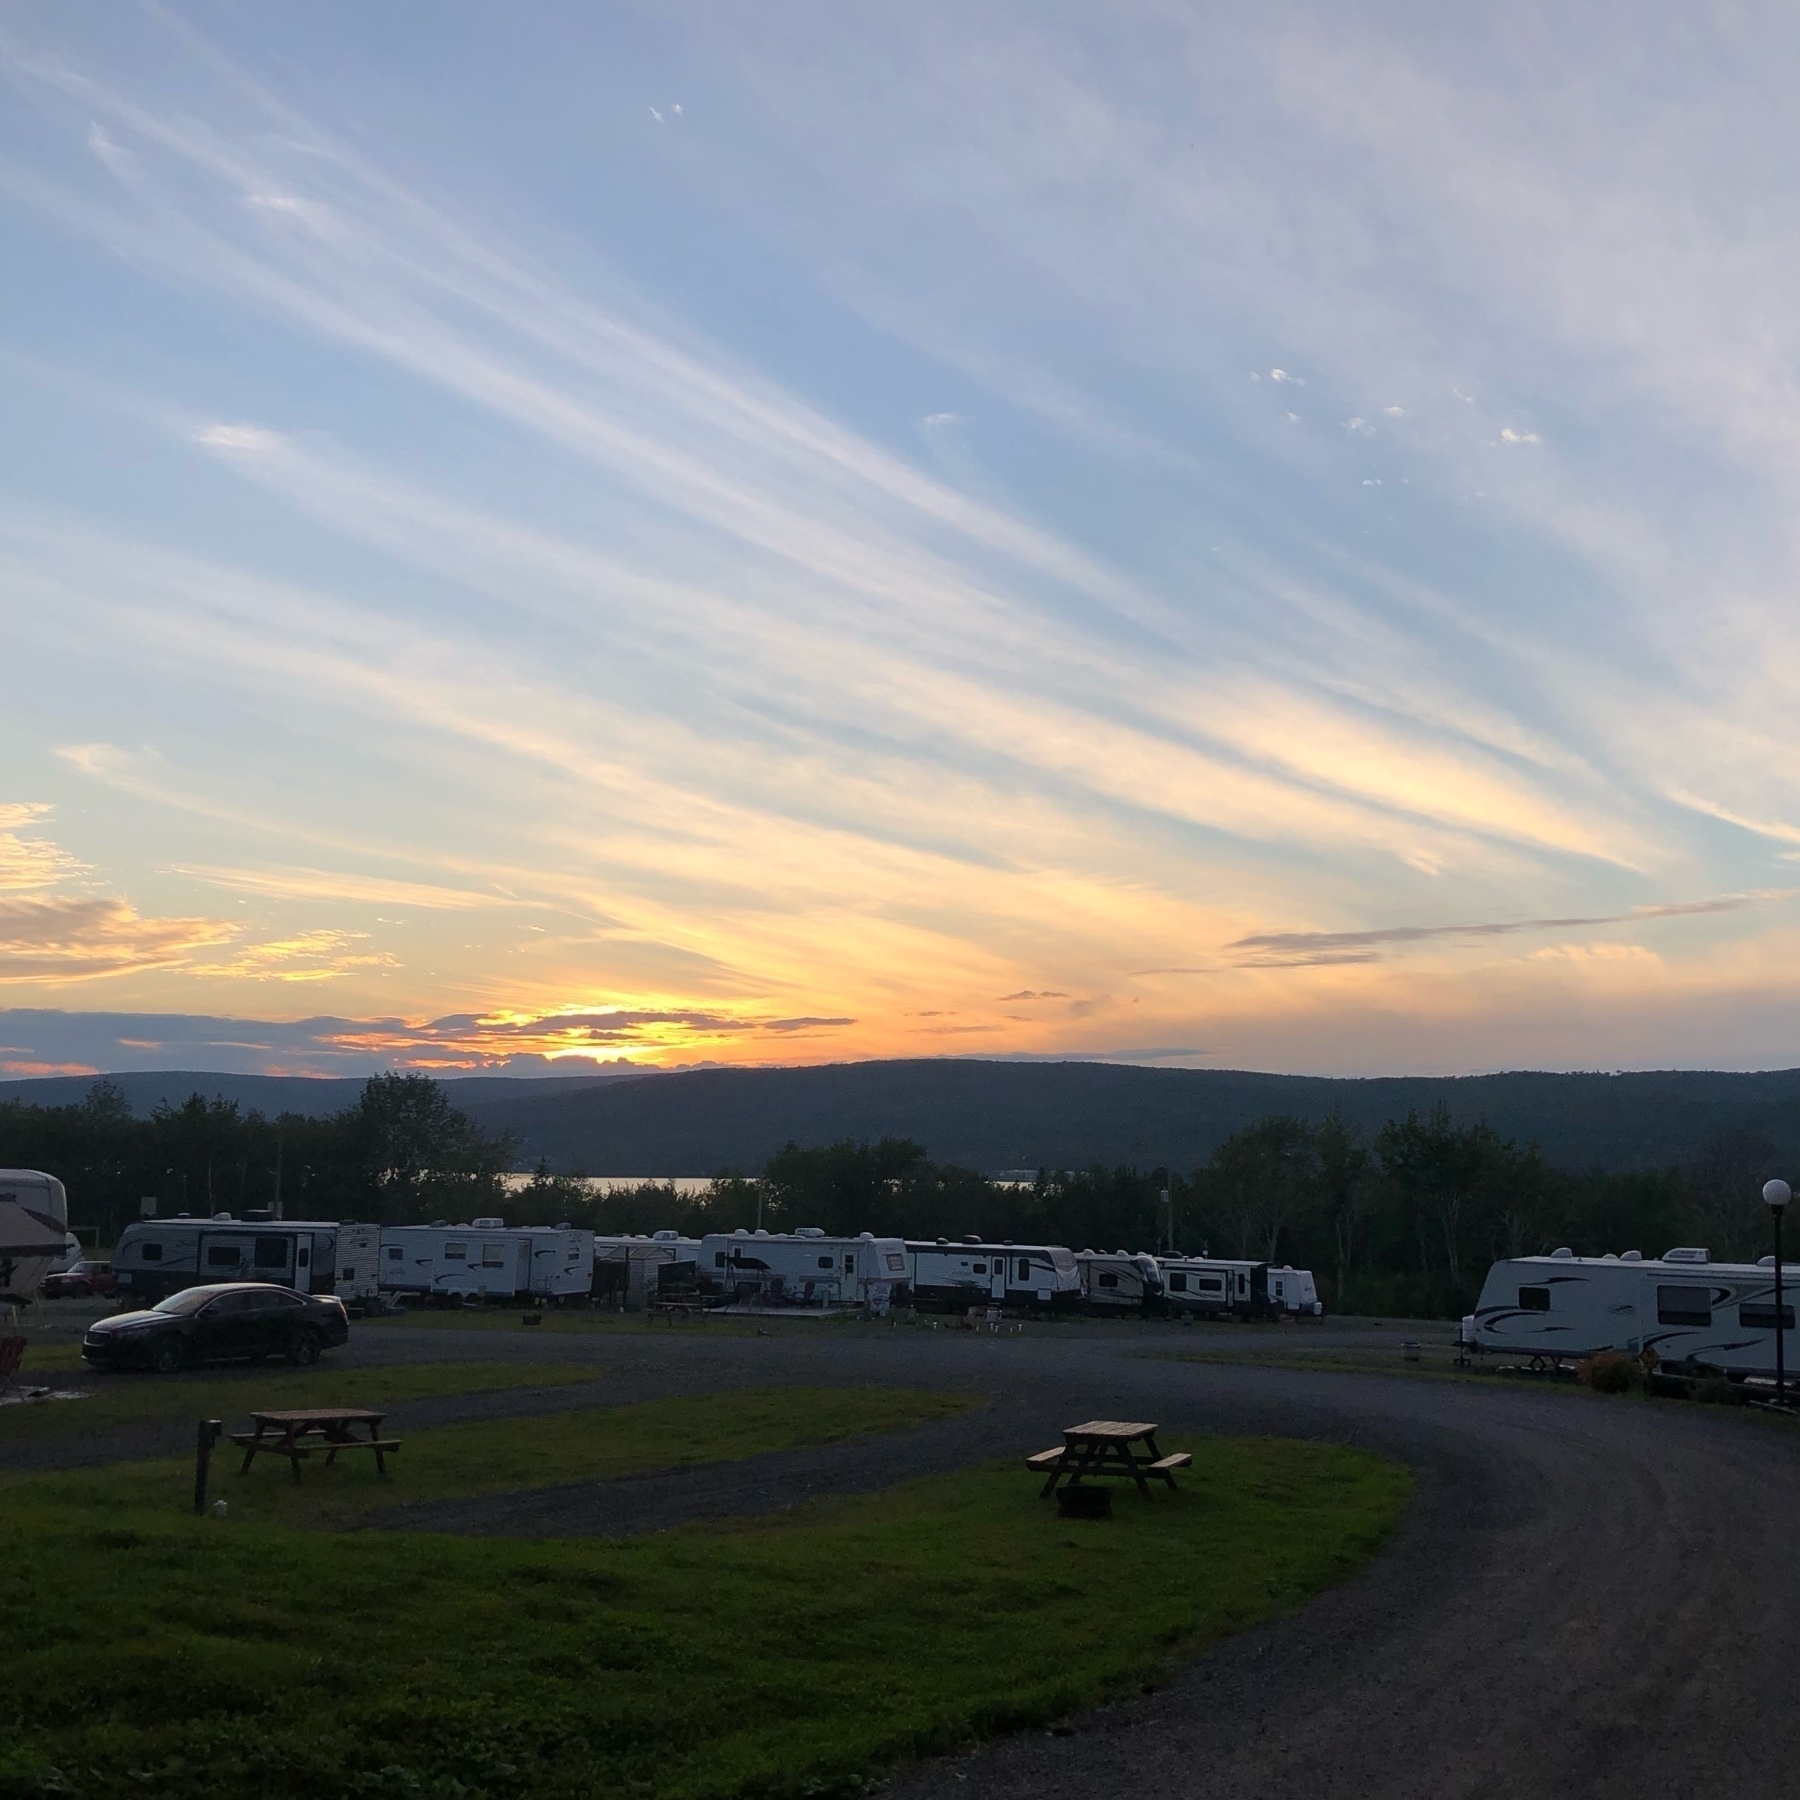 sunset over a campground. there is a large hill in the background